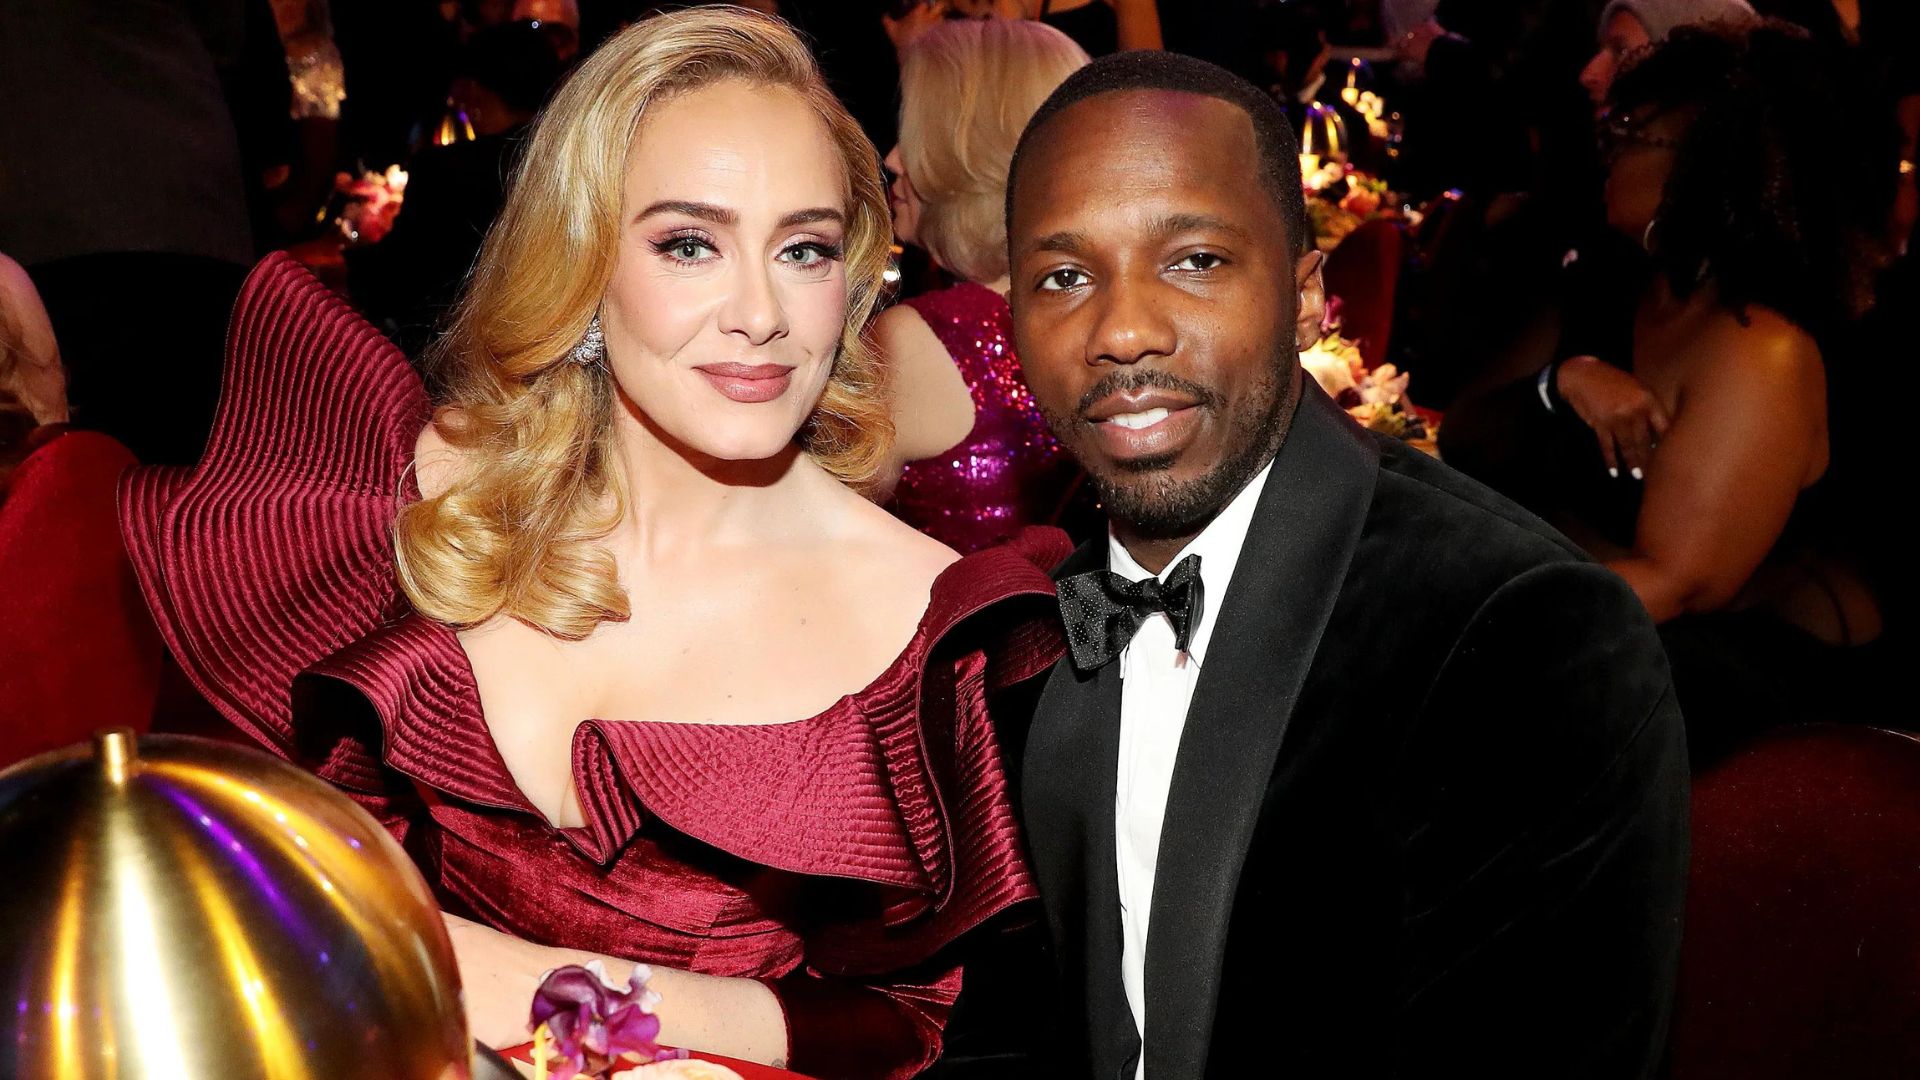 Who Is Adele's Husband? She Confirms Secret Marriage